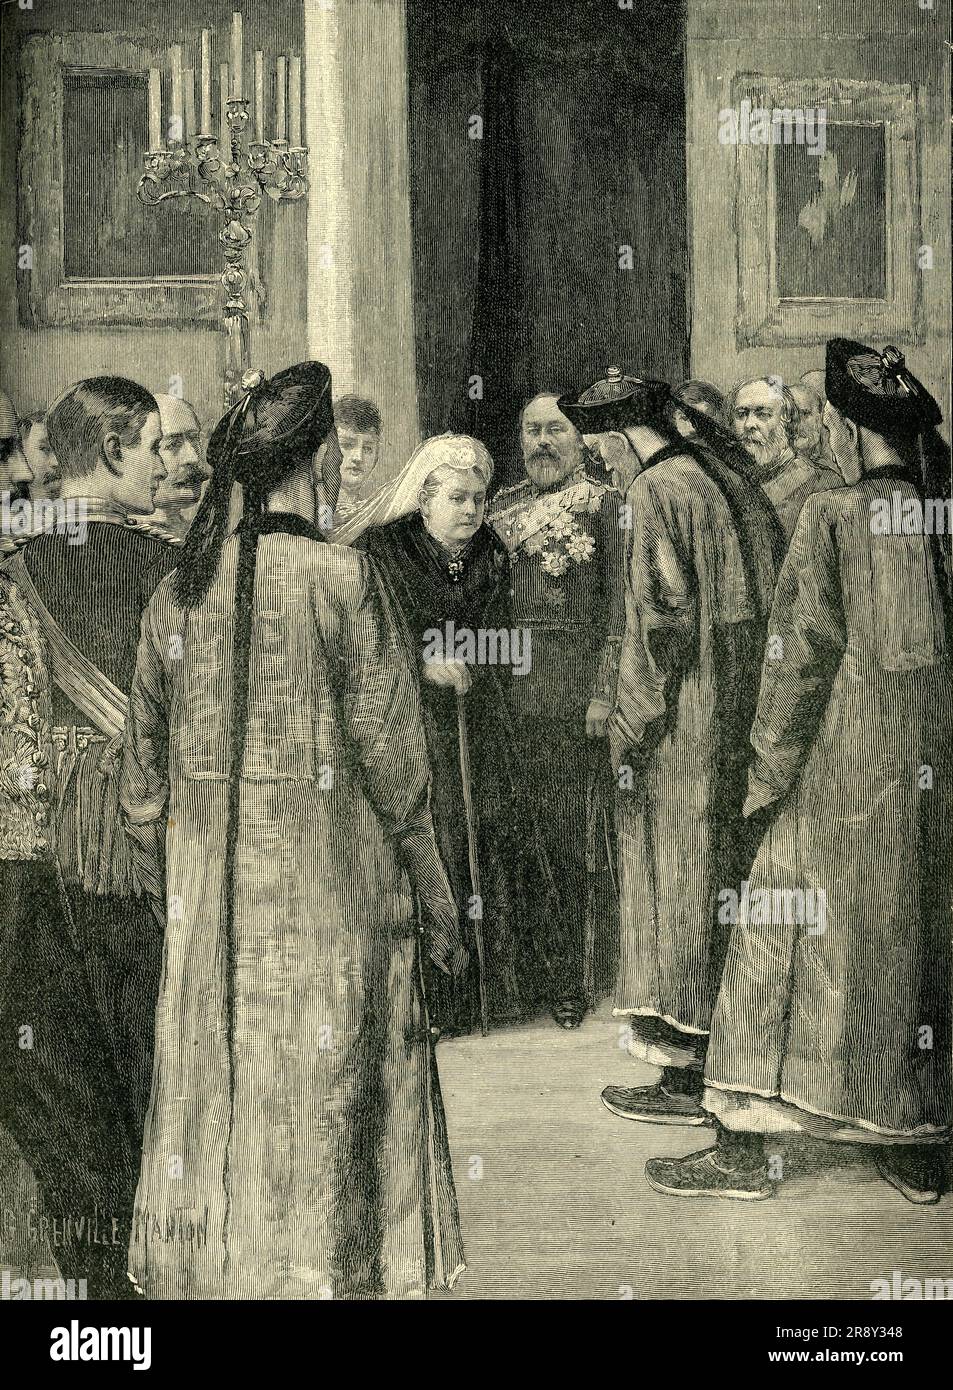 'Visit of Li Hung Chang to the Queen at Osborne', c1900. Chinese diplomat Li Hongzhang, Viceroy of Zhili, with Queen Victoria at Osborne House in 1896. '...he failed to give the extensive orders for ships and materials of war that some of his entertainers had hoped for, and the general feeling was that too much fuss had been made over him'. From &quot;Cassell's History of England, Vol. IX&quot;. [Cassell and Company, Limited, London, Paris, New York &amp; Melbourne] Stock Photo